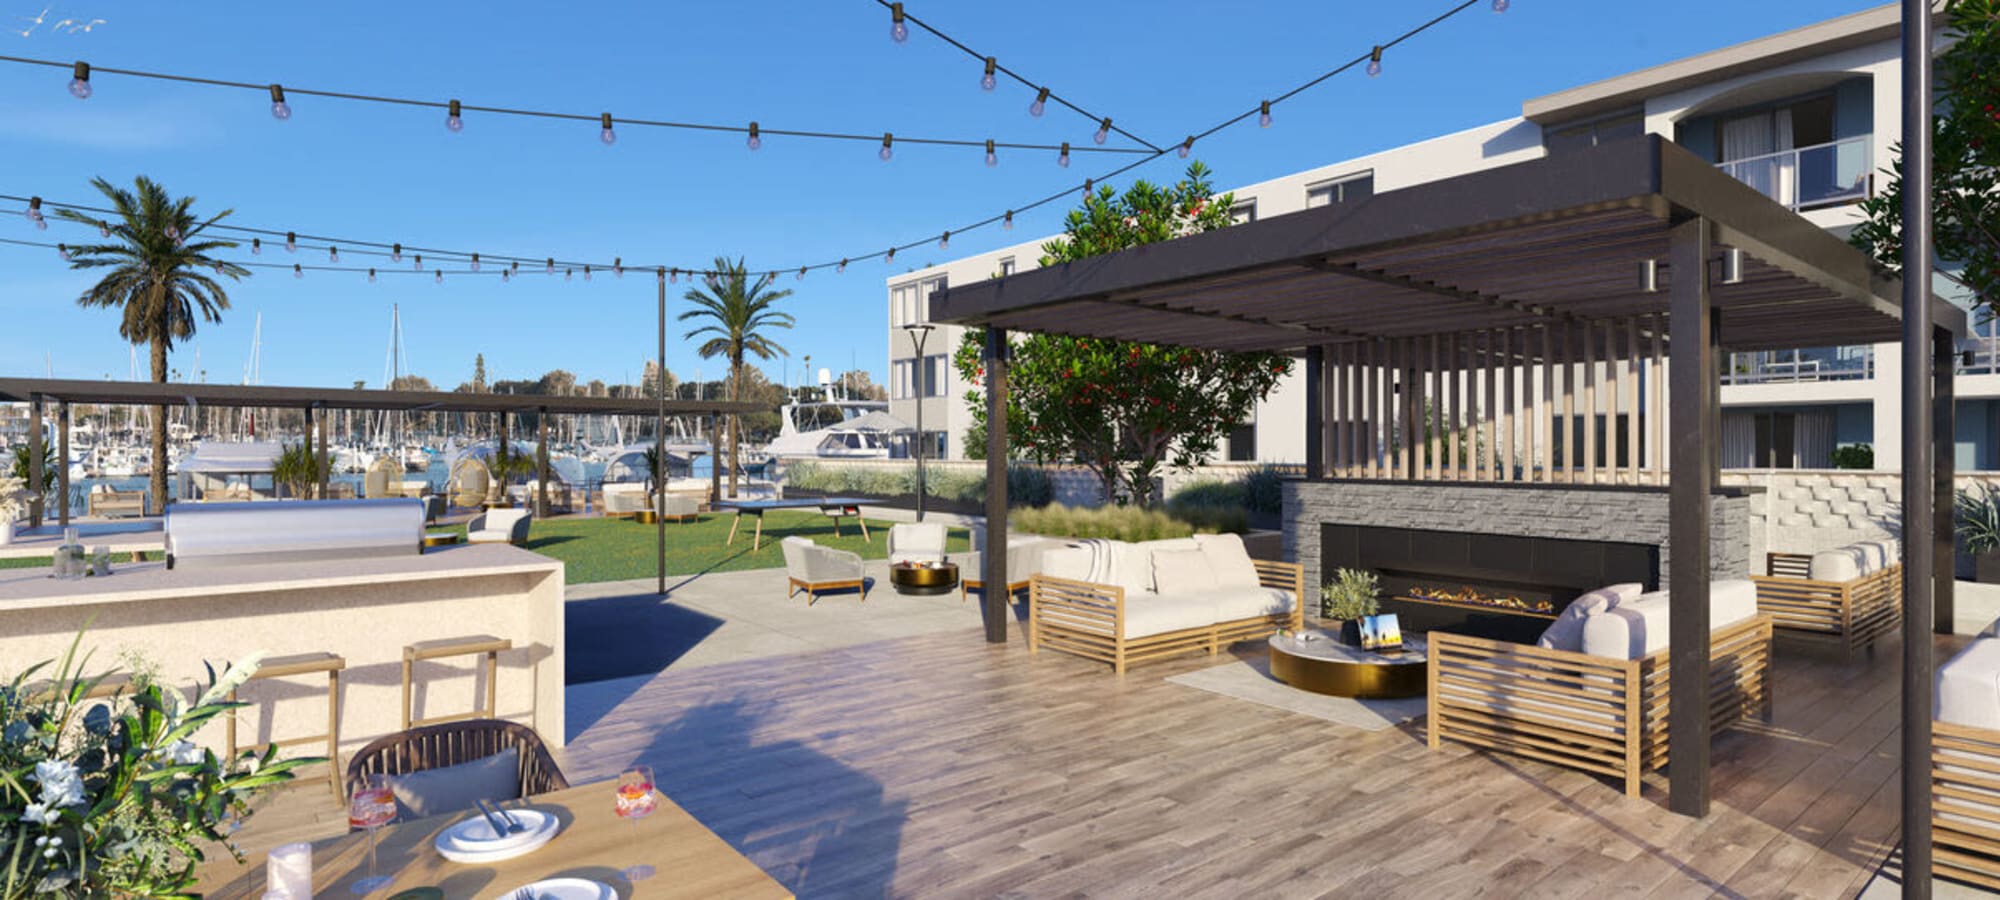 An outdoor fireside lounge and grilling station at Dolphin Marina Apartments in Marina Del Rey, California